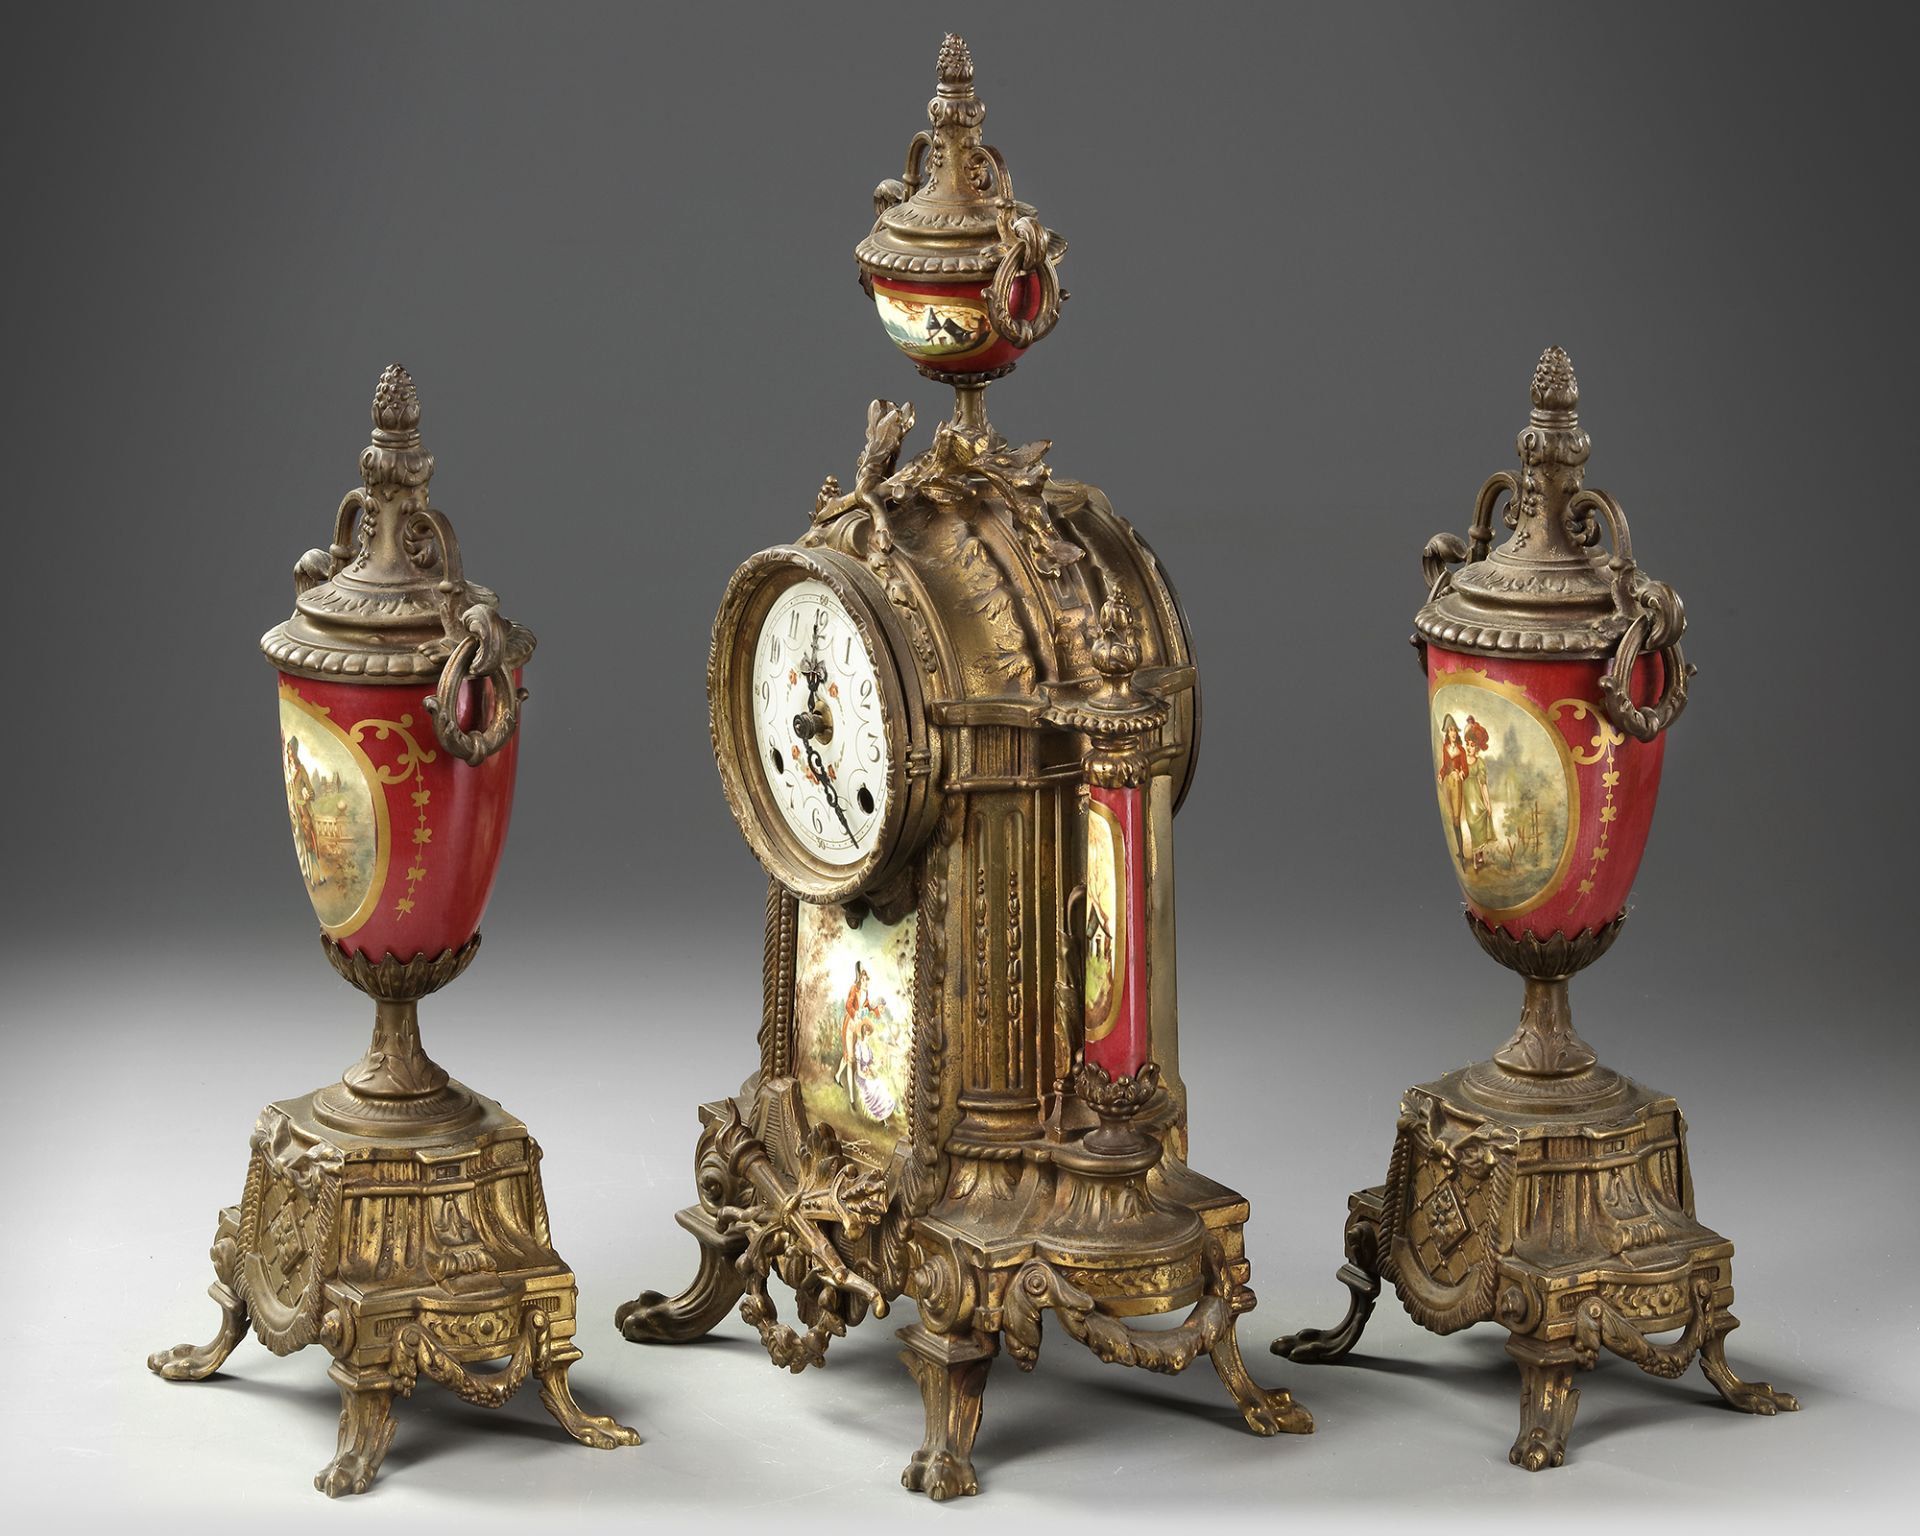 A SPELTER AND RED PORCELAIN CLOCK SET, 19TH CENTURY - Image 2 of 4